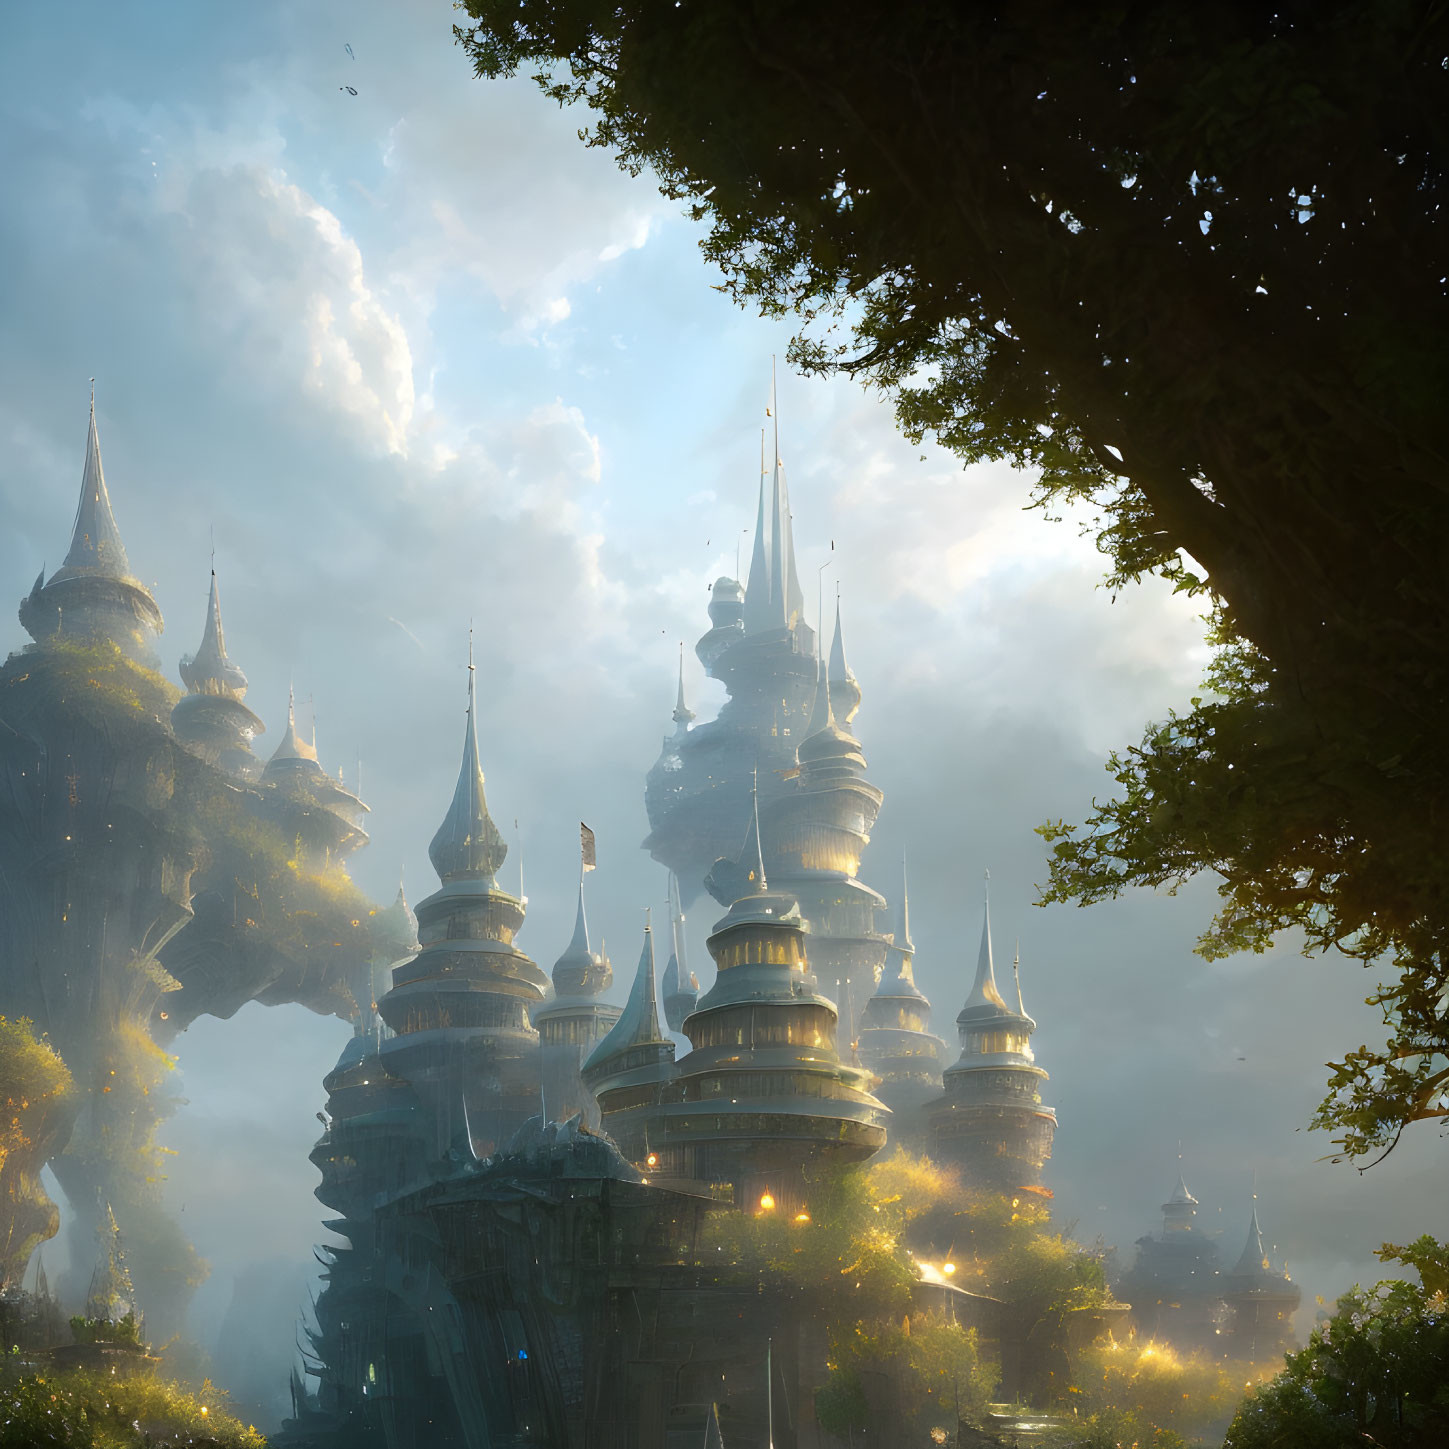 Mystical floating castle with spires in ethereal light